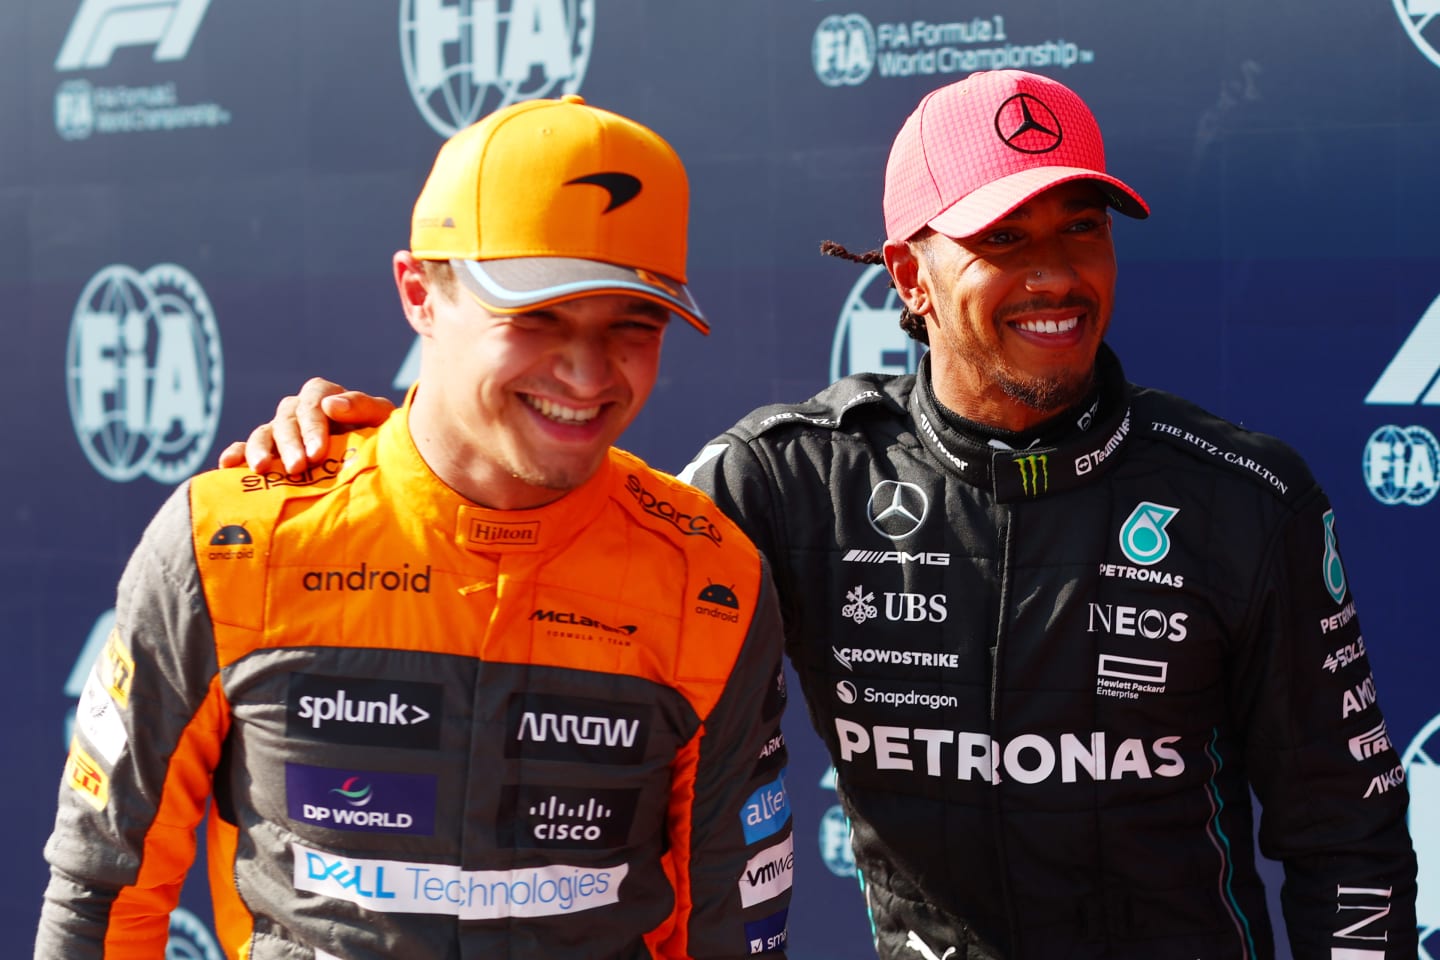 BUDAPEST, HUNGARY - JULY 22: Pole position qualifier Lewis Hamilton of Great Britain and Mercedes celebrates in parc ferme with third placed qualifier Lando Norris of Great Britain and McLaren during qualifying ahead of the F1 Grand Prix of Hungary at Hungaroring on July 22, 2023 in Budapest, Hungary. (Photo by Dan Istitene - Formula 1/Formula 1 via Getty Images)